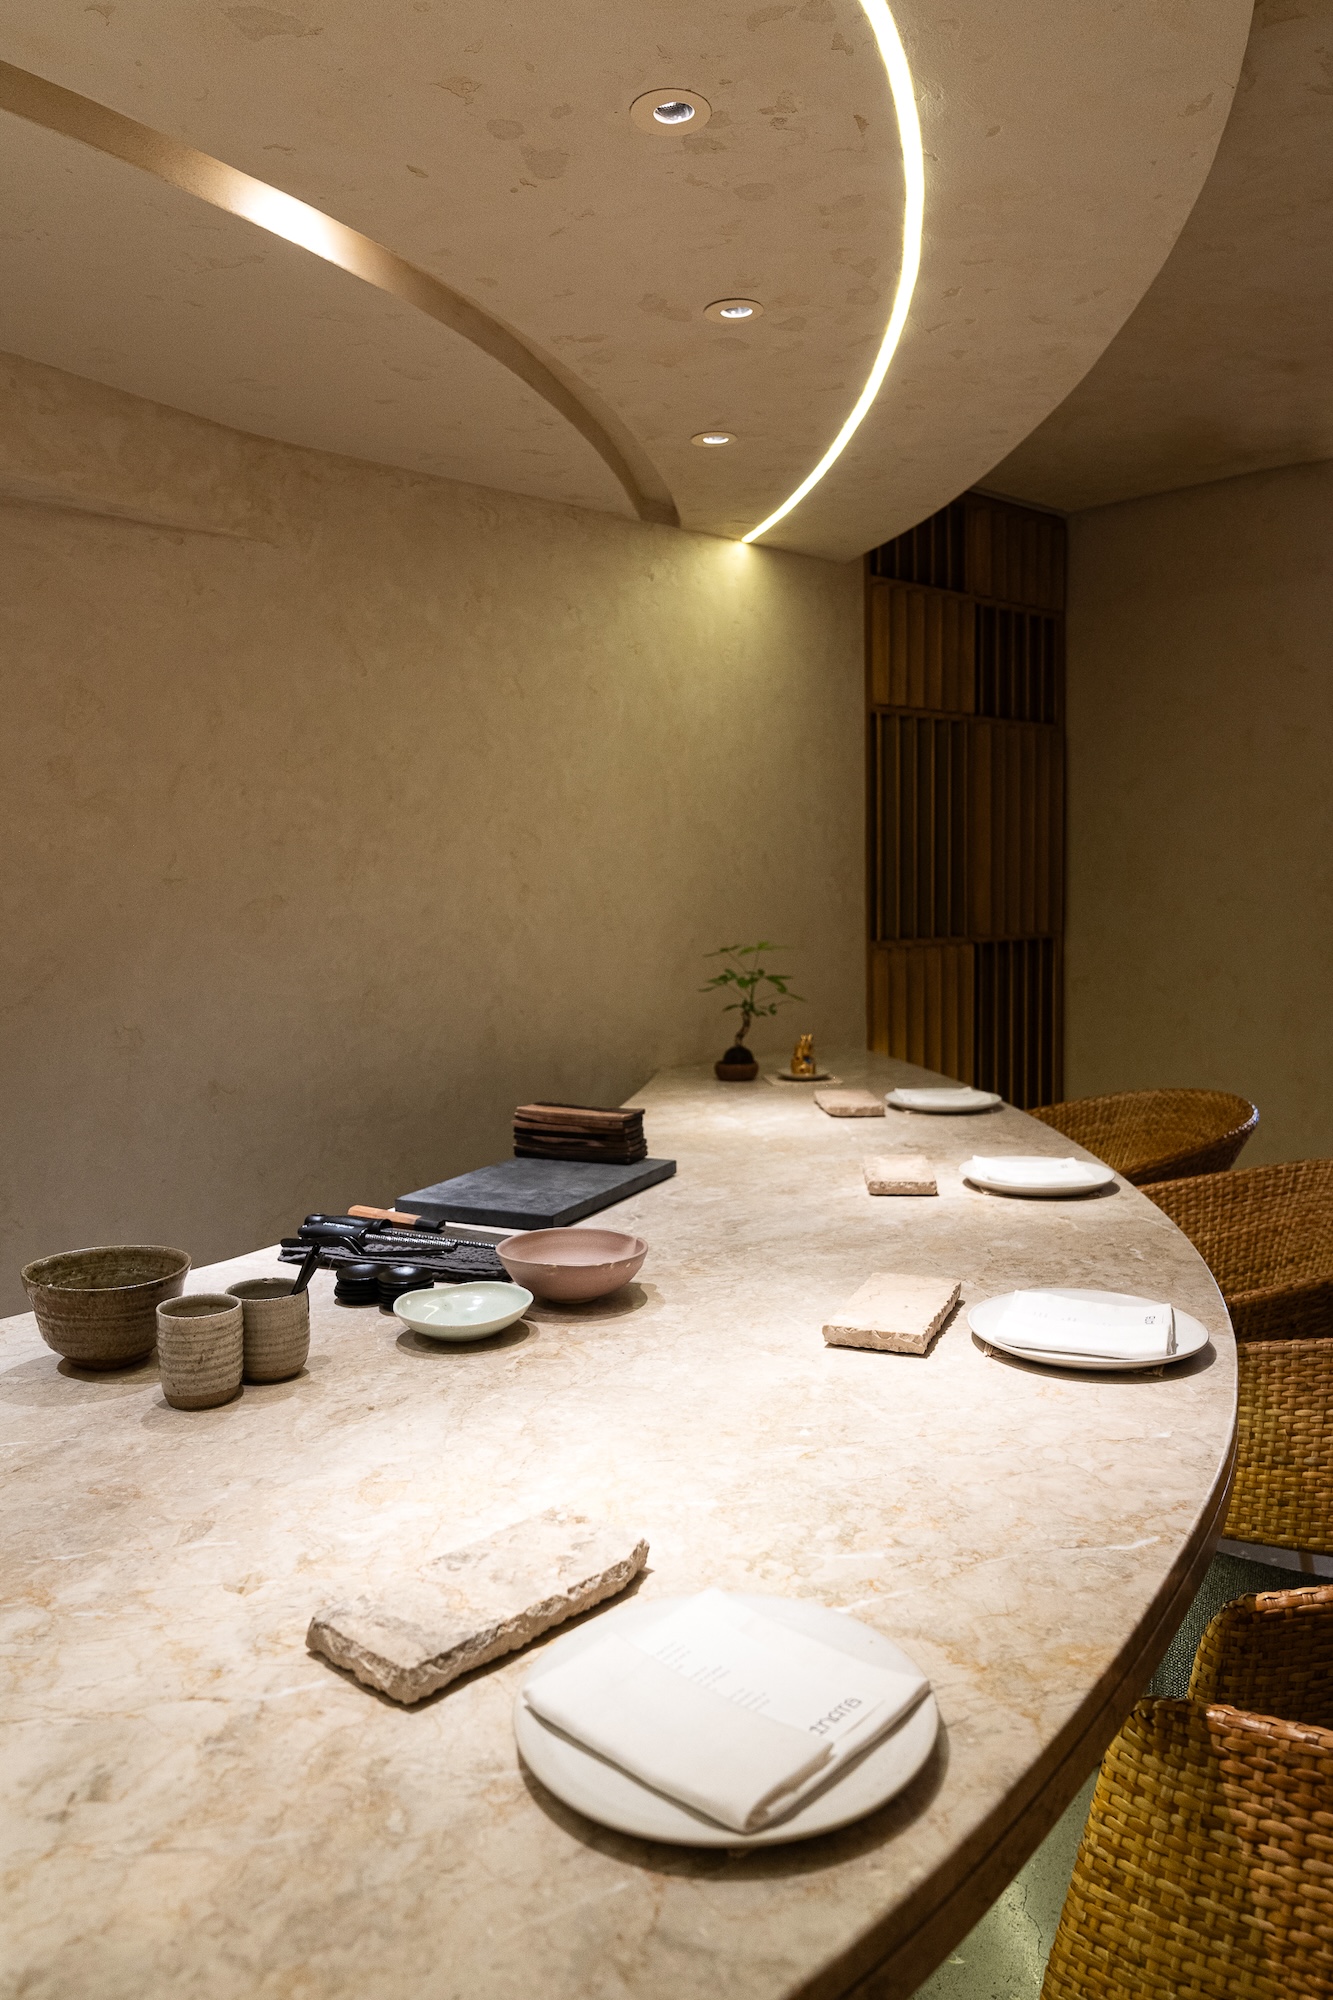 The Inatô interior is done by Studio Ong